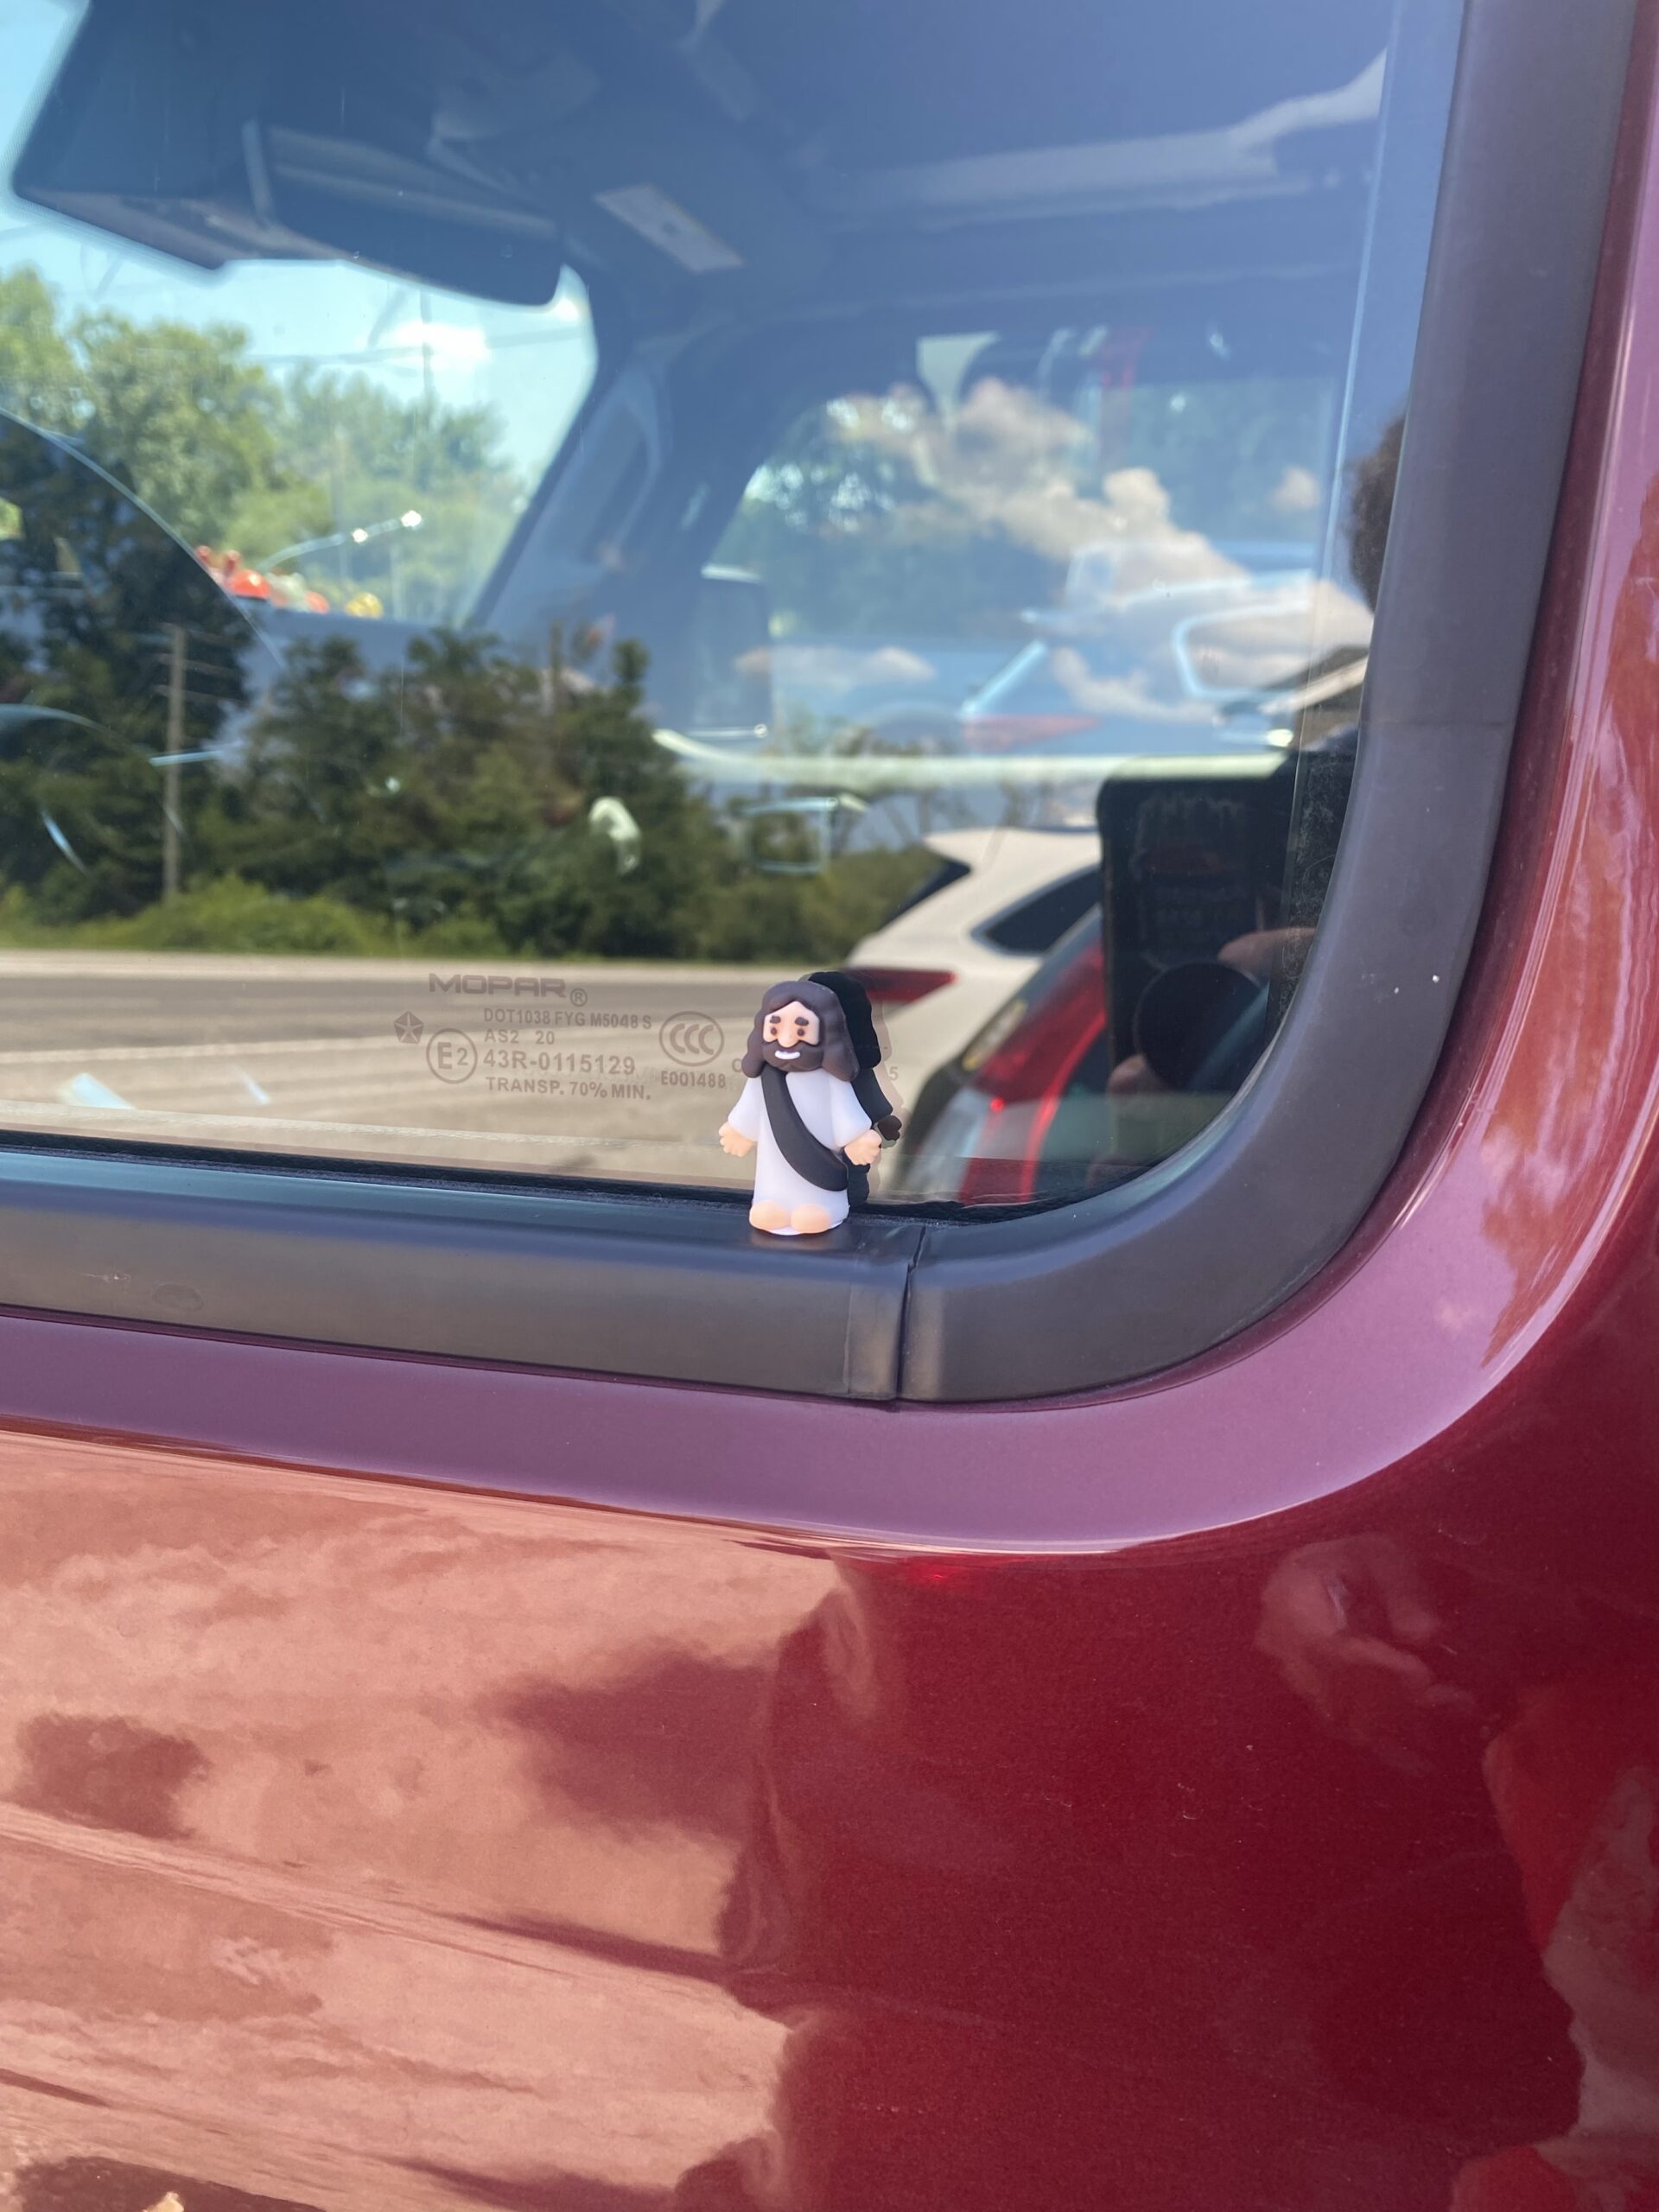 Place Little Jesus on a car. He sit perfectly on the window of this Jeep. 